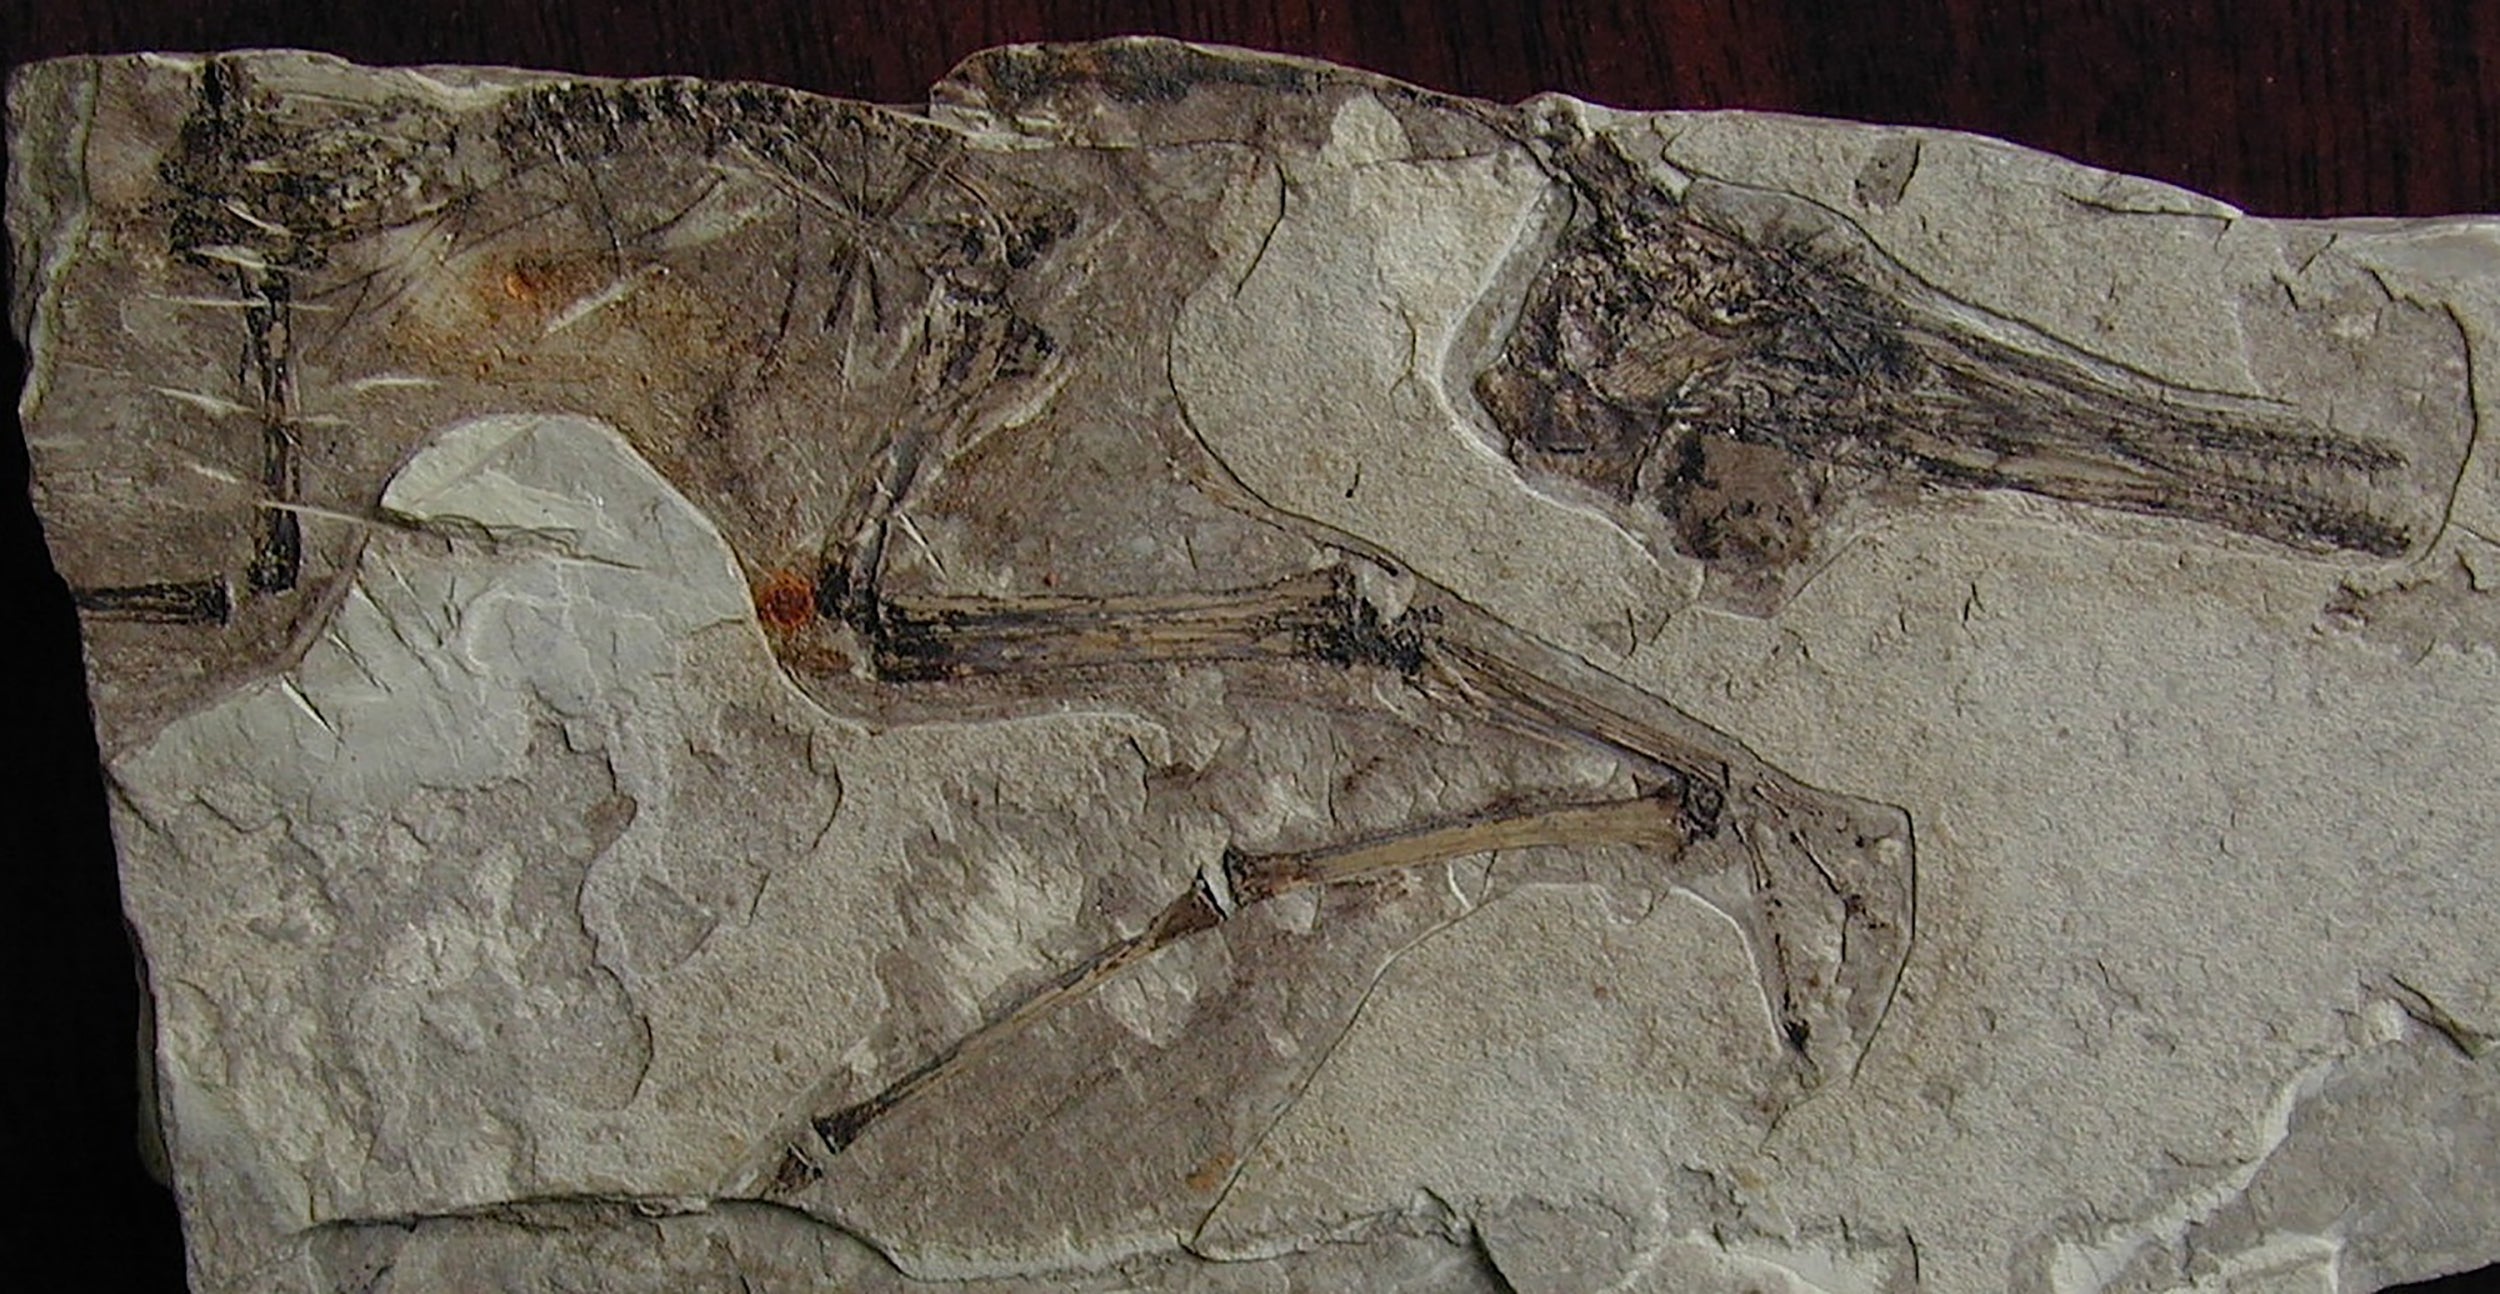 A pterosaur fossil with a wingspan of around 6 inches